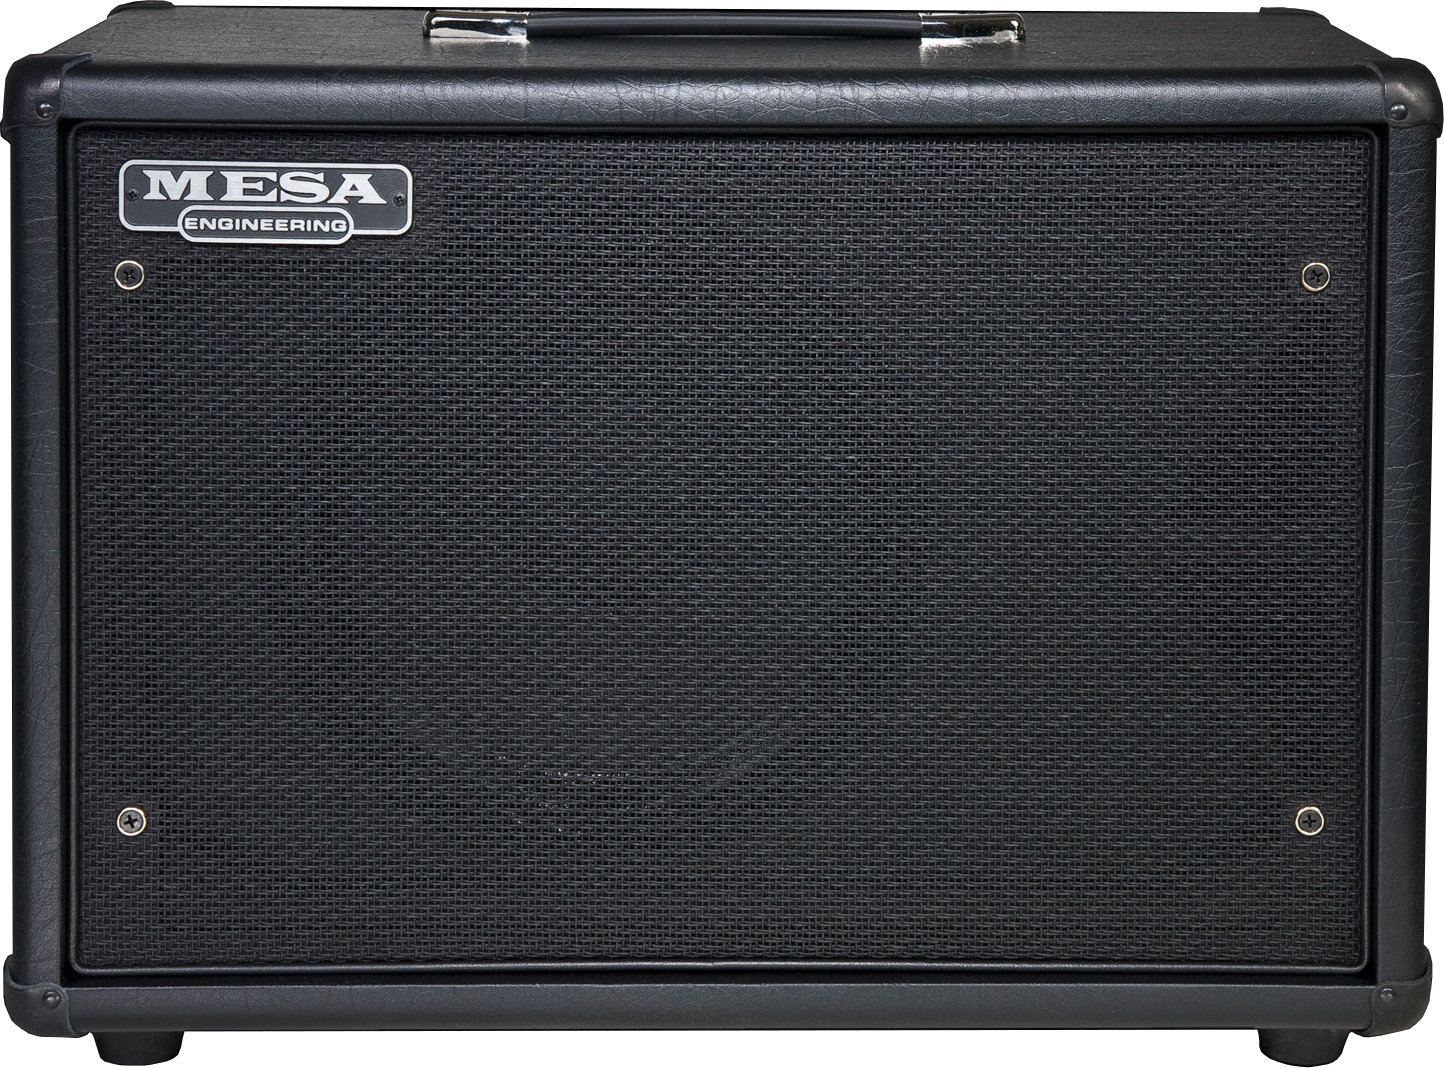 Cabinet Chitarra Mesa Boogie 1x12 Widebody Closed Back